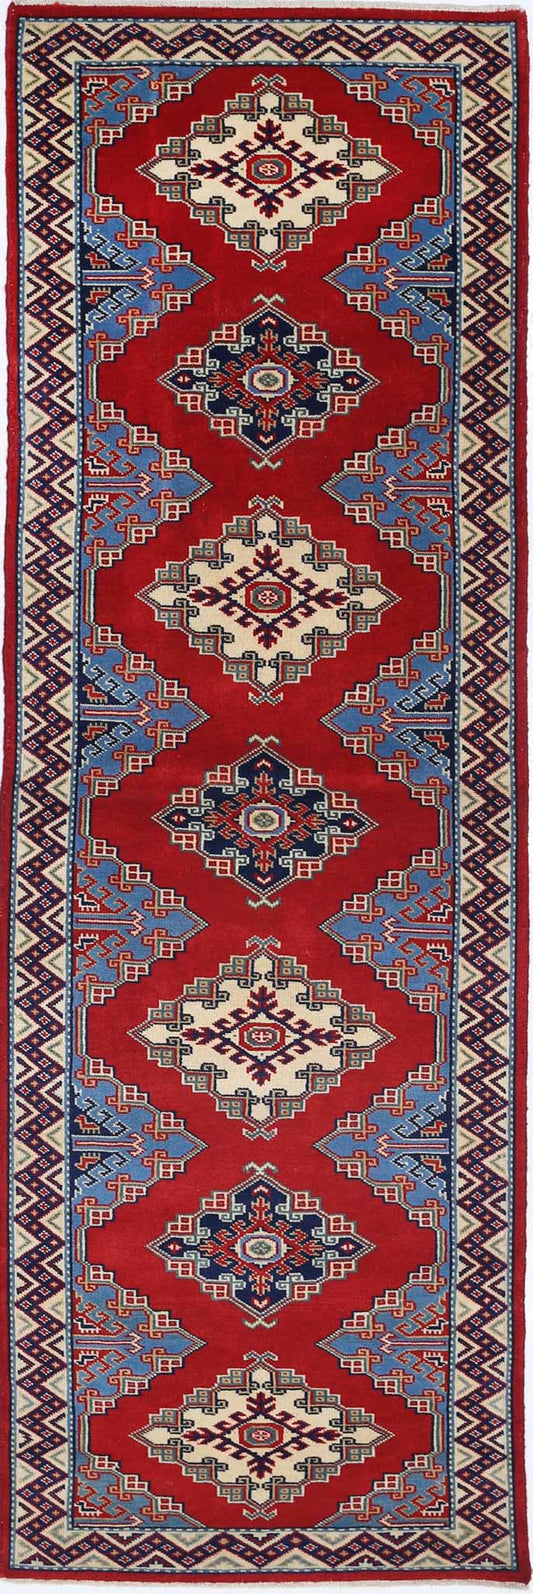 Tribal Hand Knotted Shirvan Shirvan Wool Rug of Size 2'1'' X 6'5'' in Red and Blue Colors - Made in Afghanistan